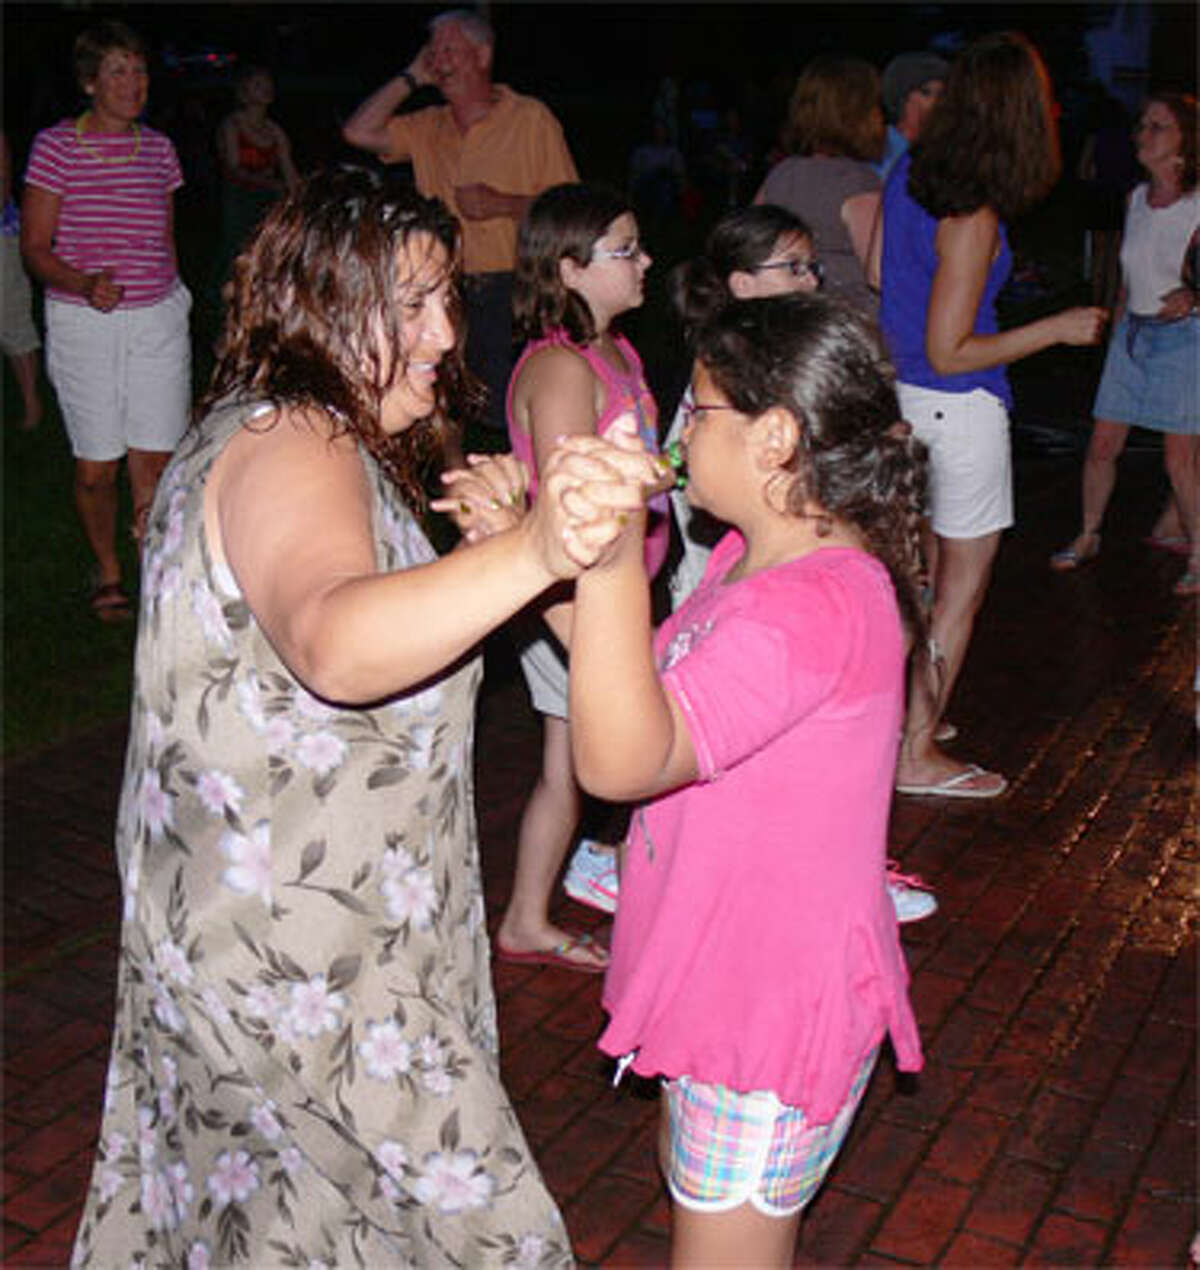 Many concert-goers began dancing in front of the gazebo as the night went on.